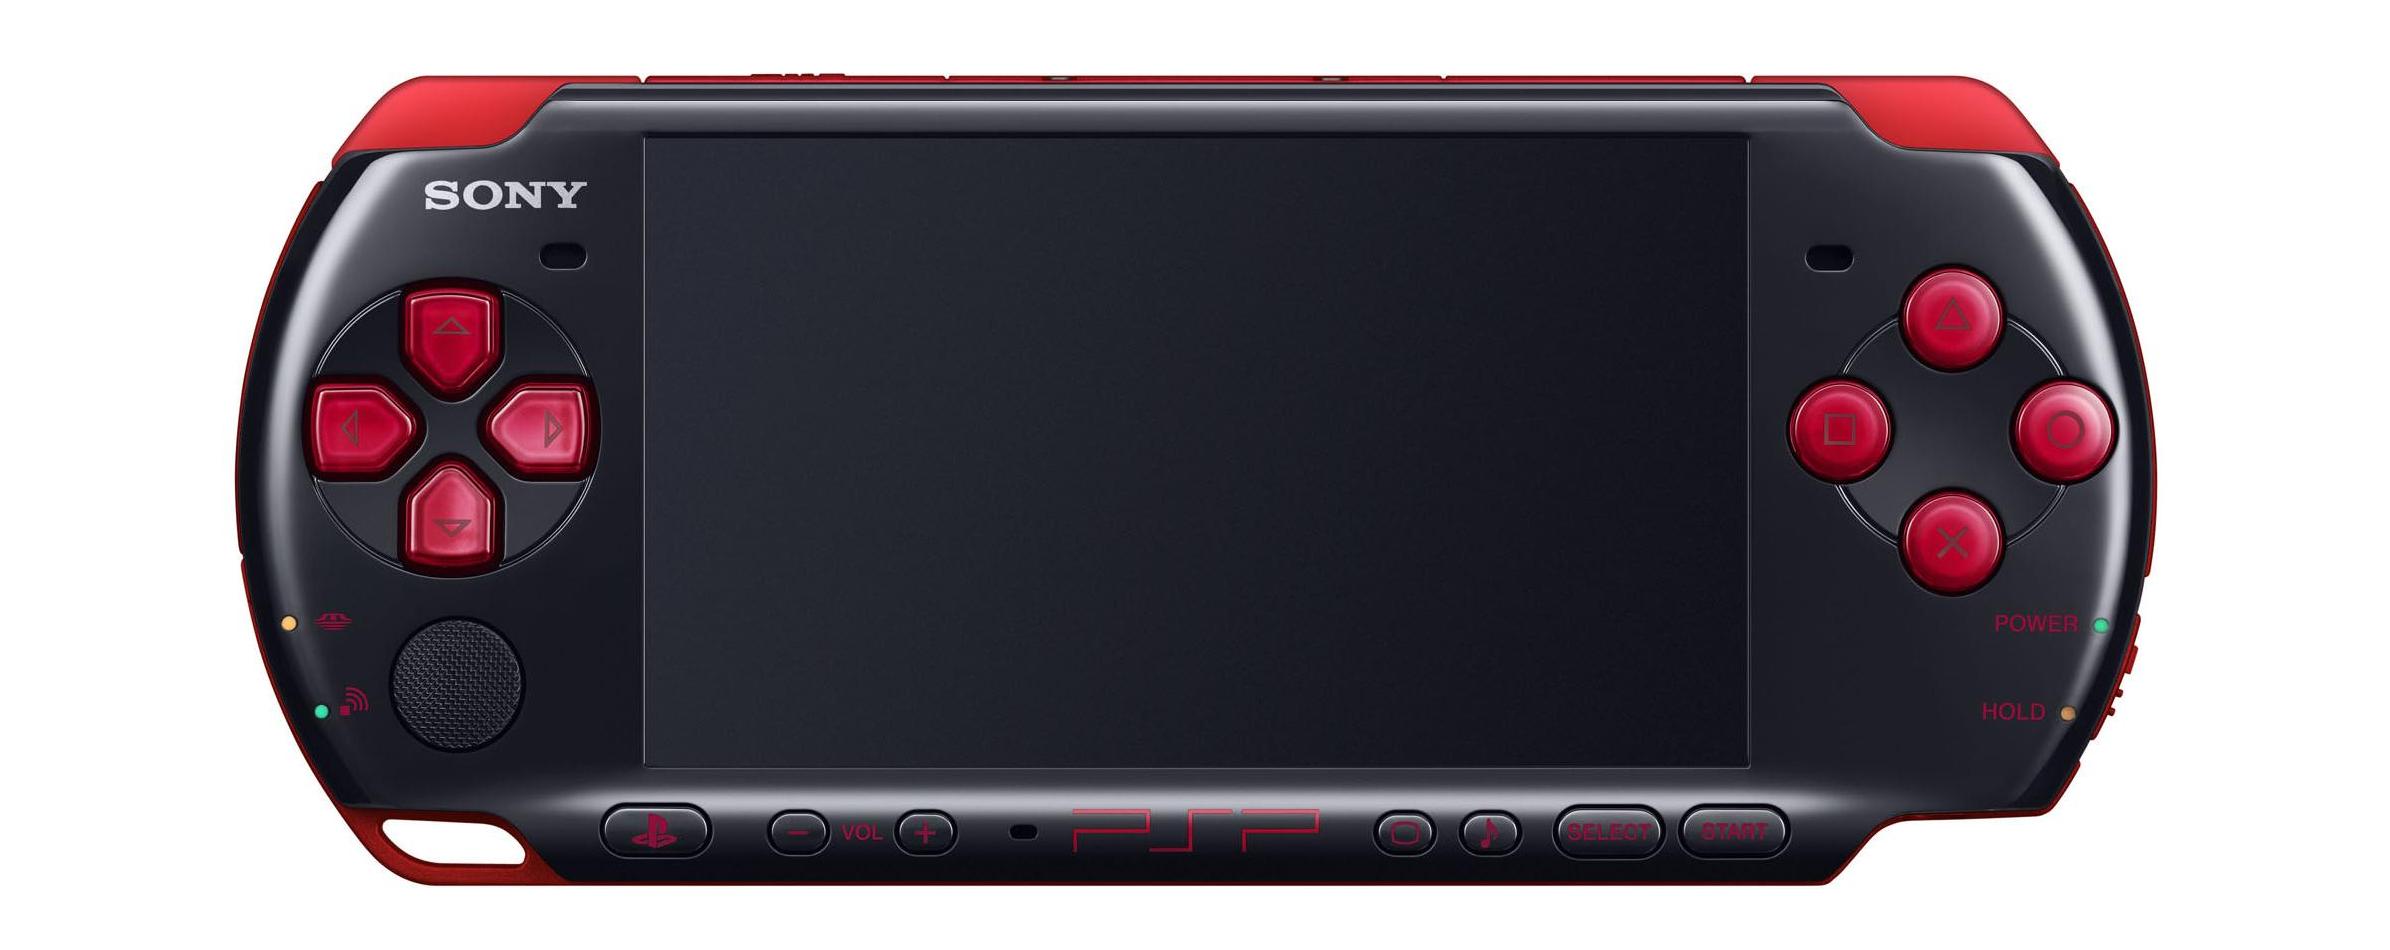 Handheld Game Console Manufactured And Marketed By Sony Computer Entertainment